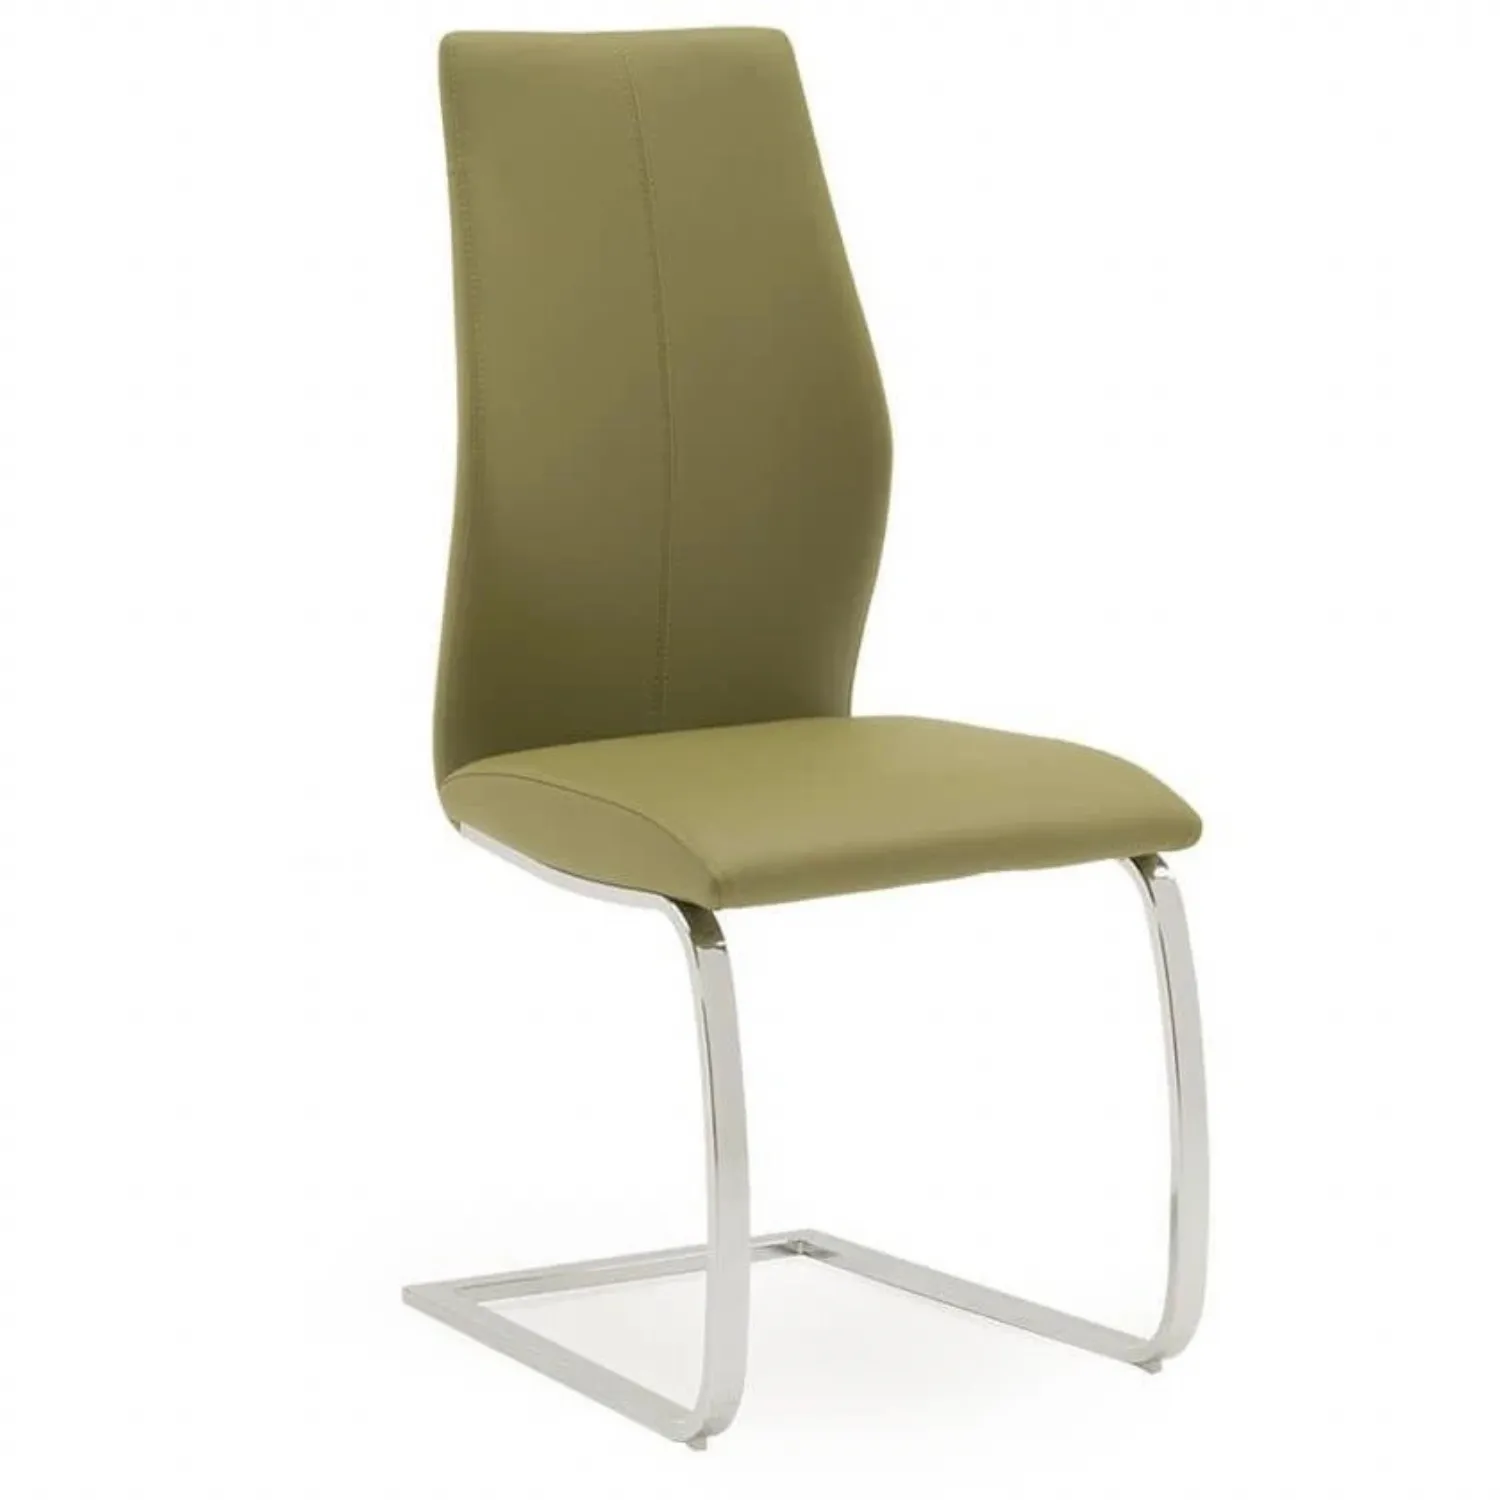 Olive Green Leather Cantilever Dining Chair